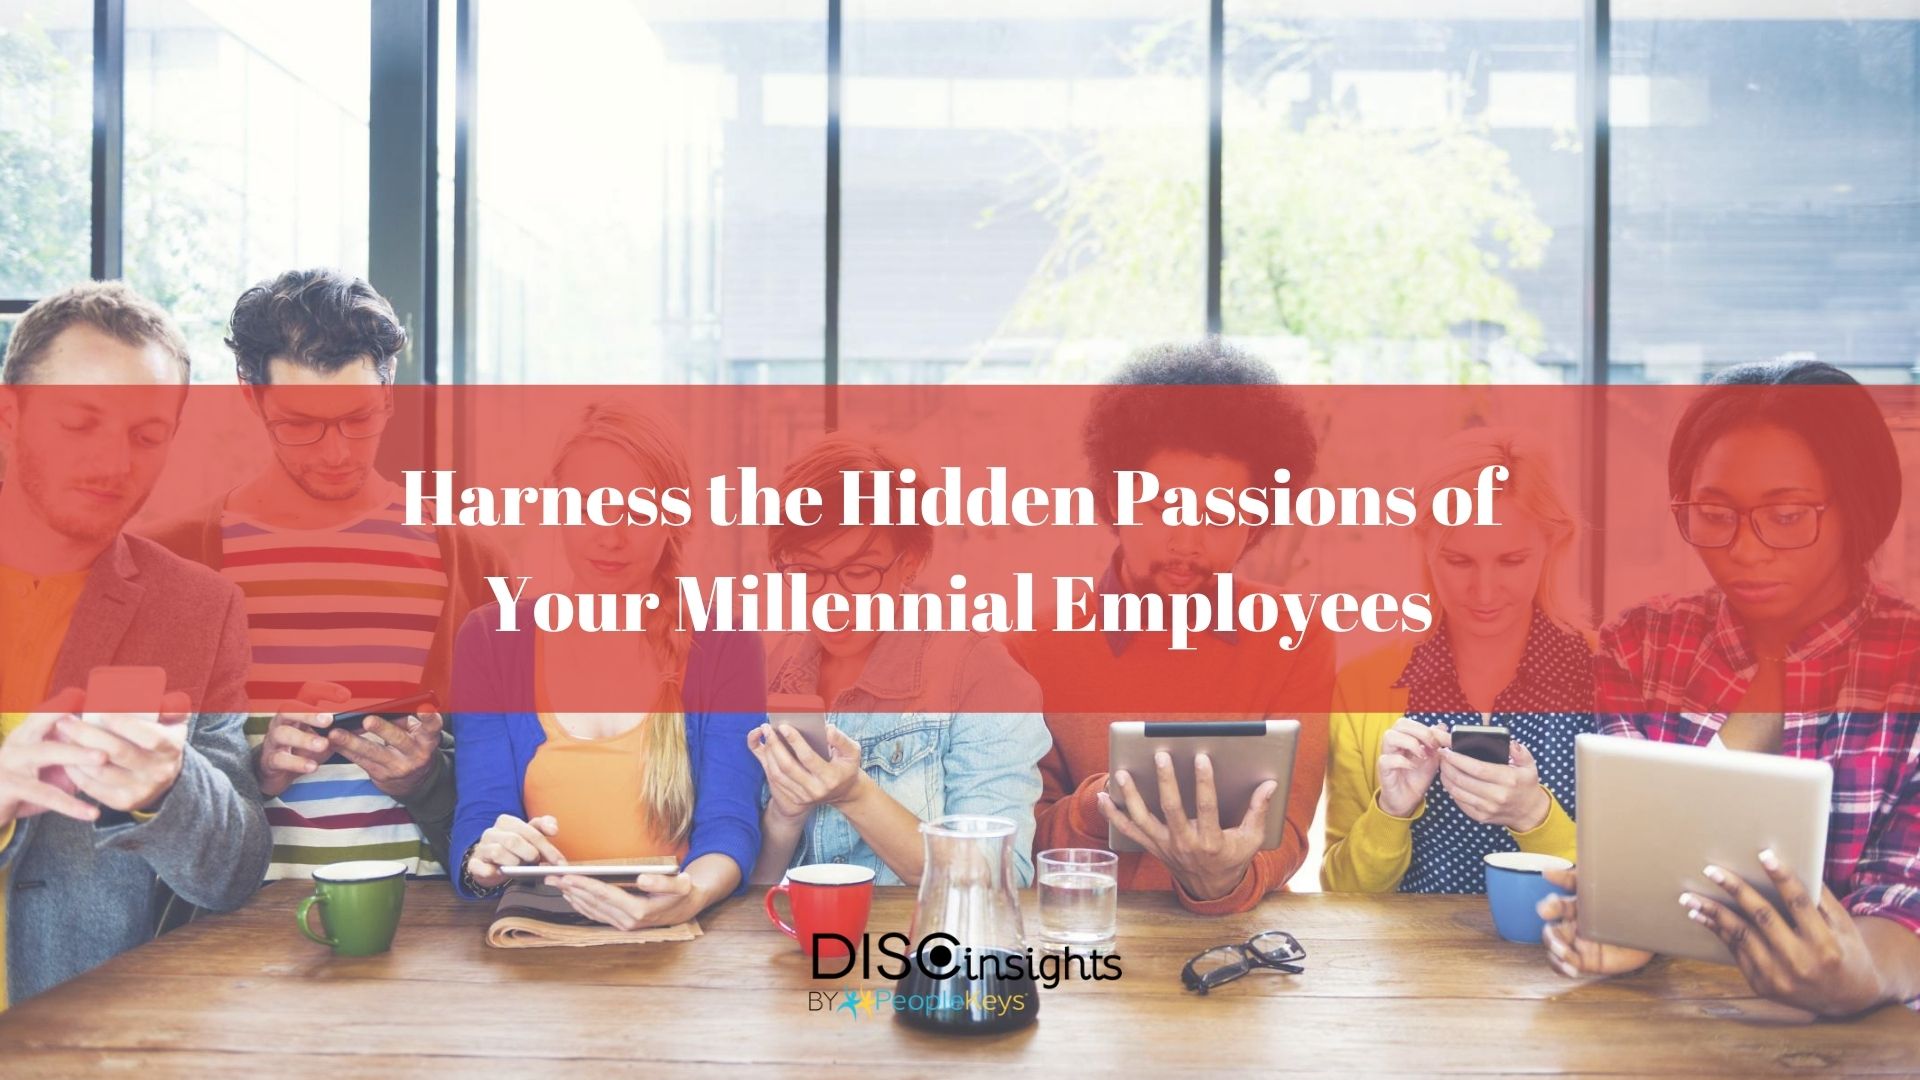 Harness the Hidden Passions of Your Millennial Employees